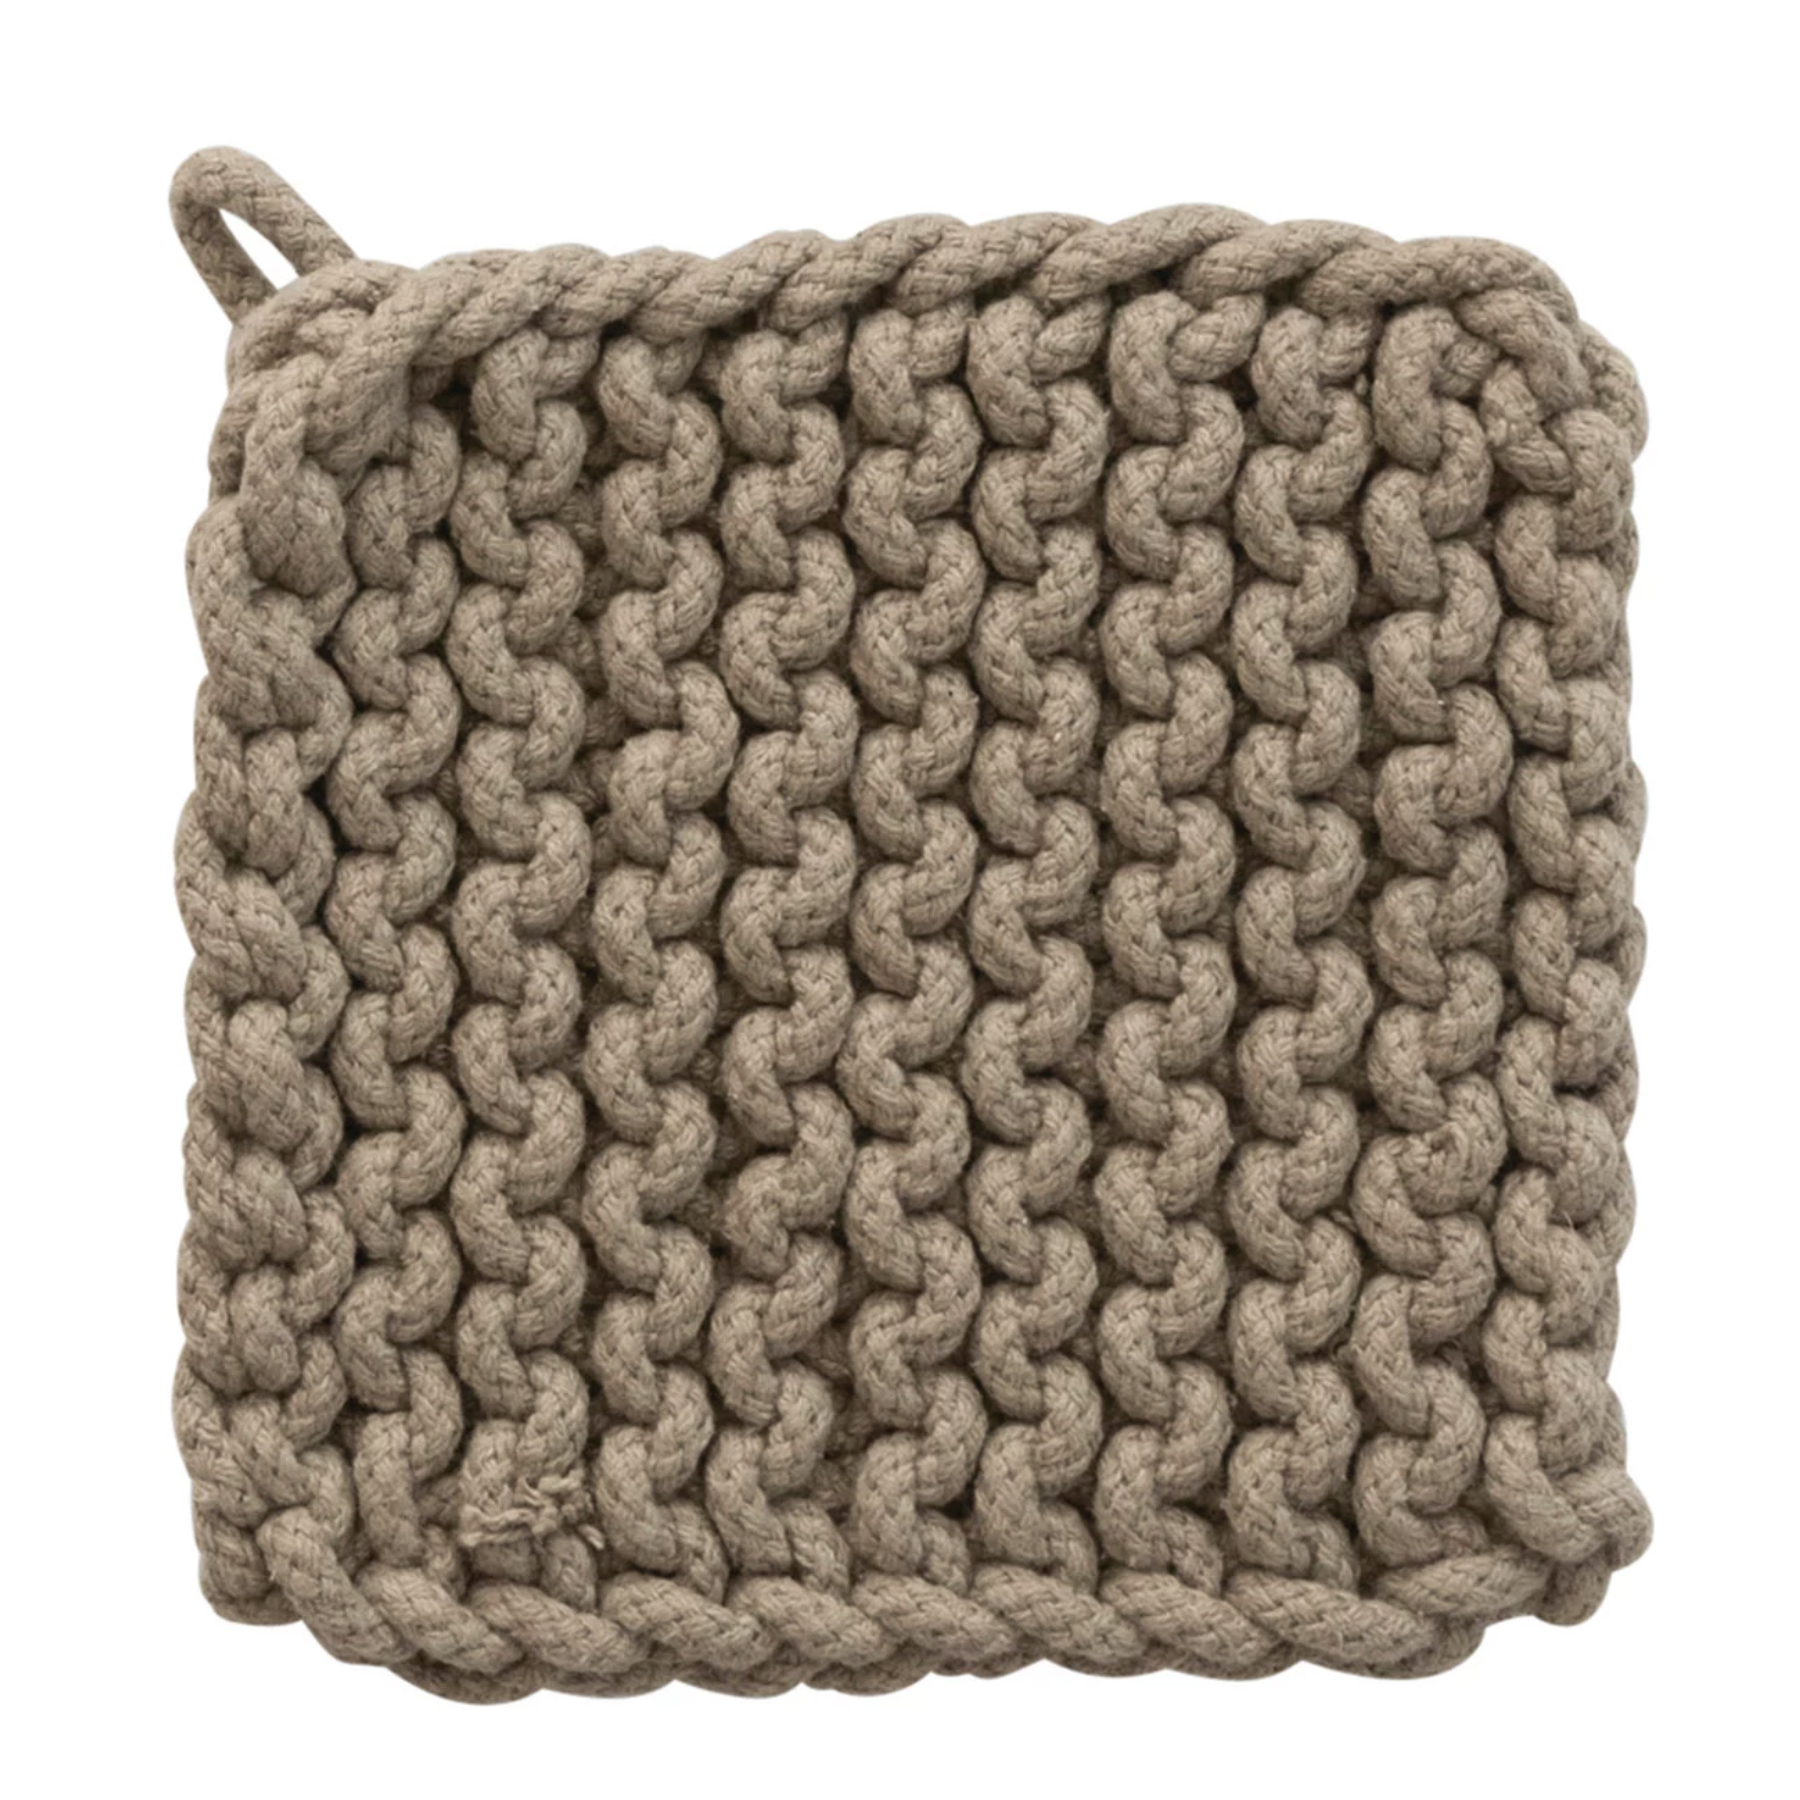 Cotton Crocheted Pot Holder - Taupe